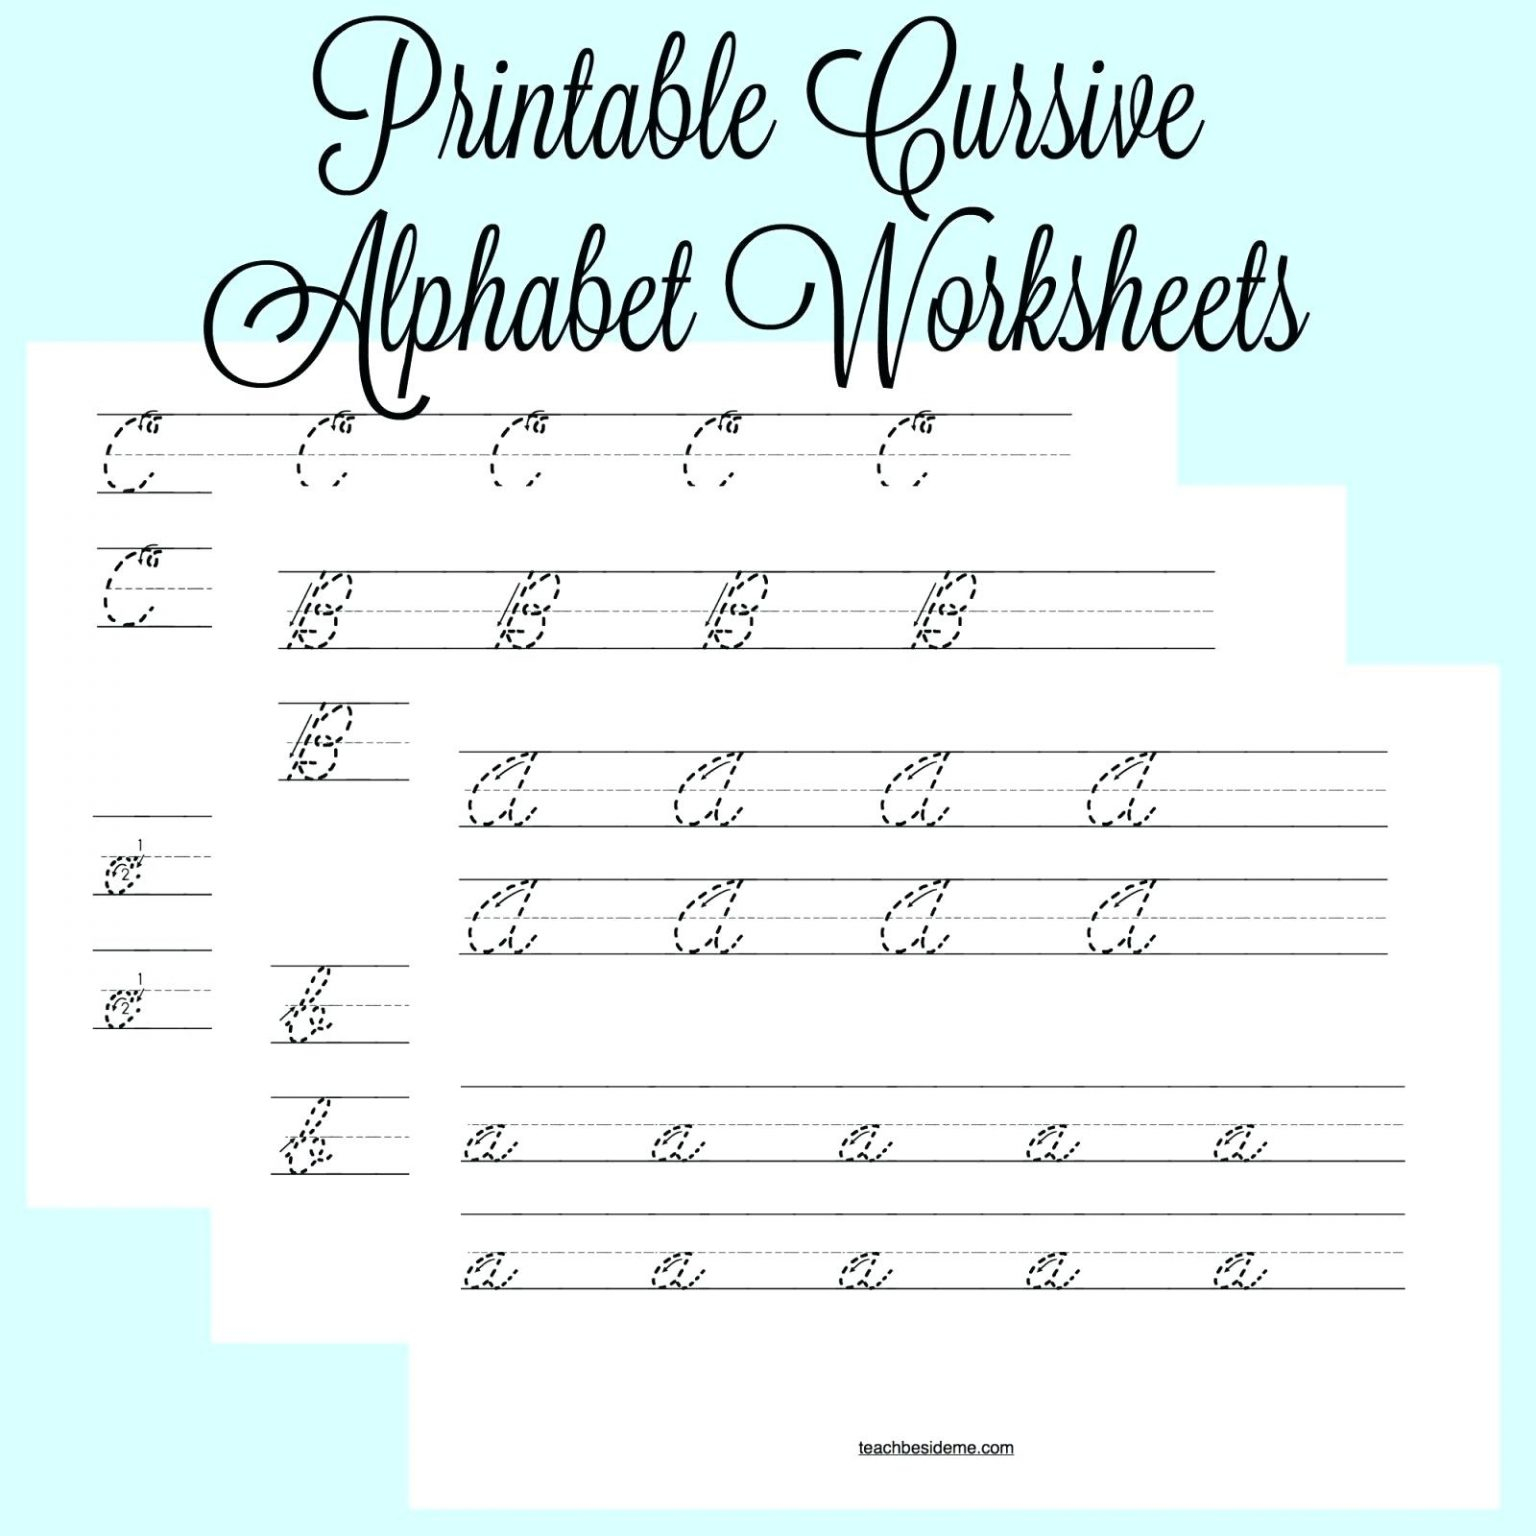 printable-tracing-cursive-letters-tracinglettersworksheetscom-tracing-cursive-letters